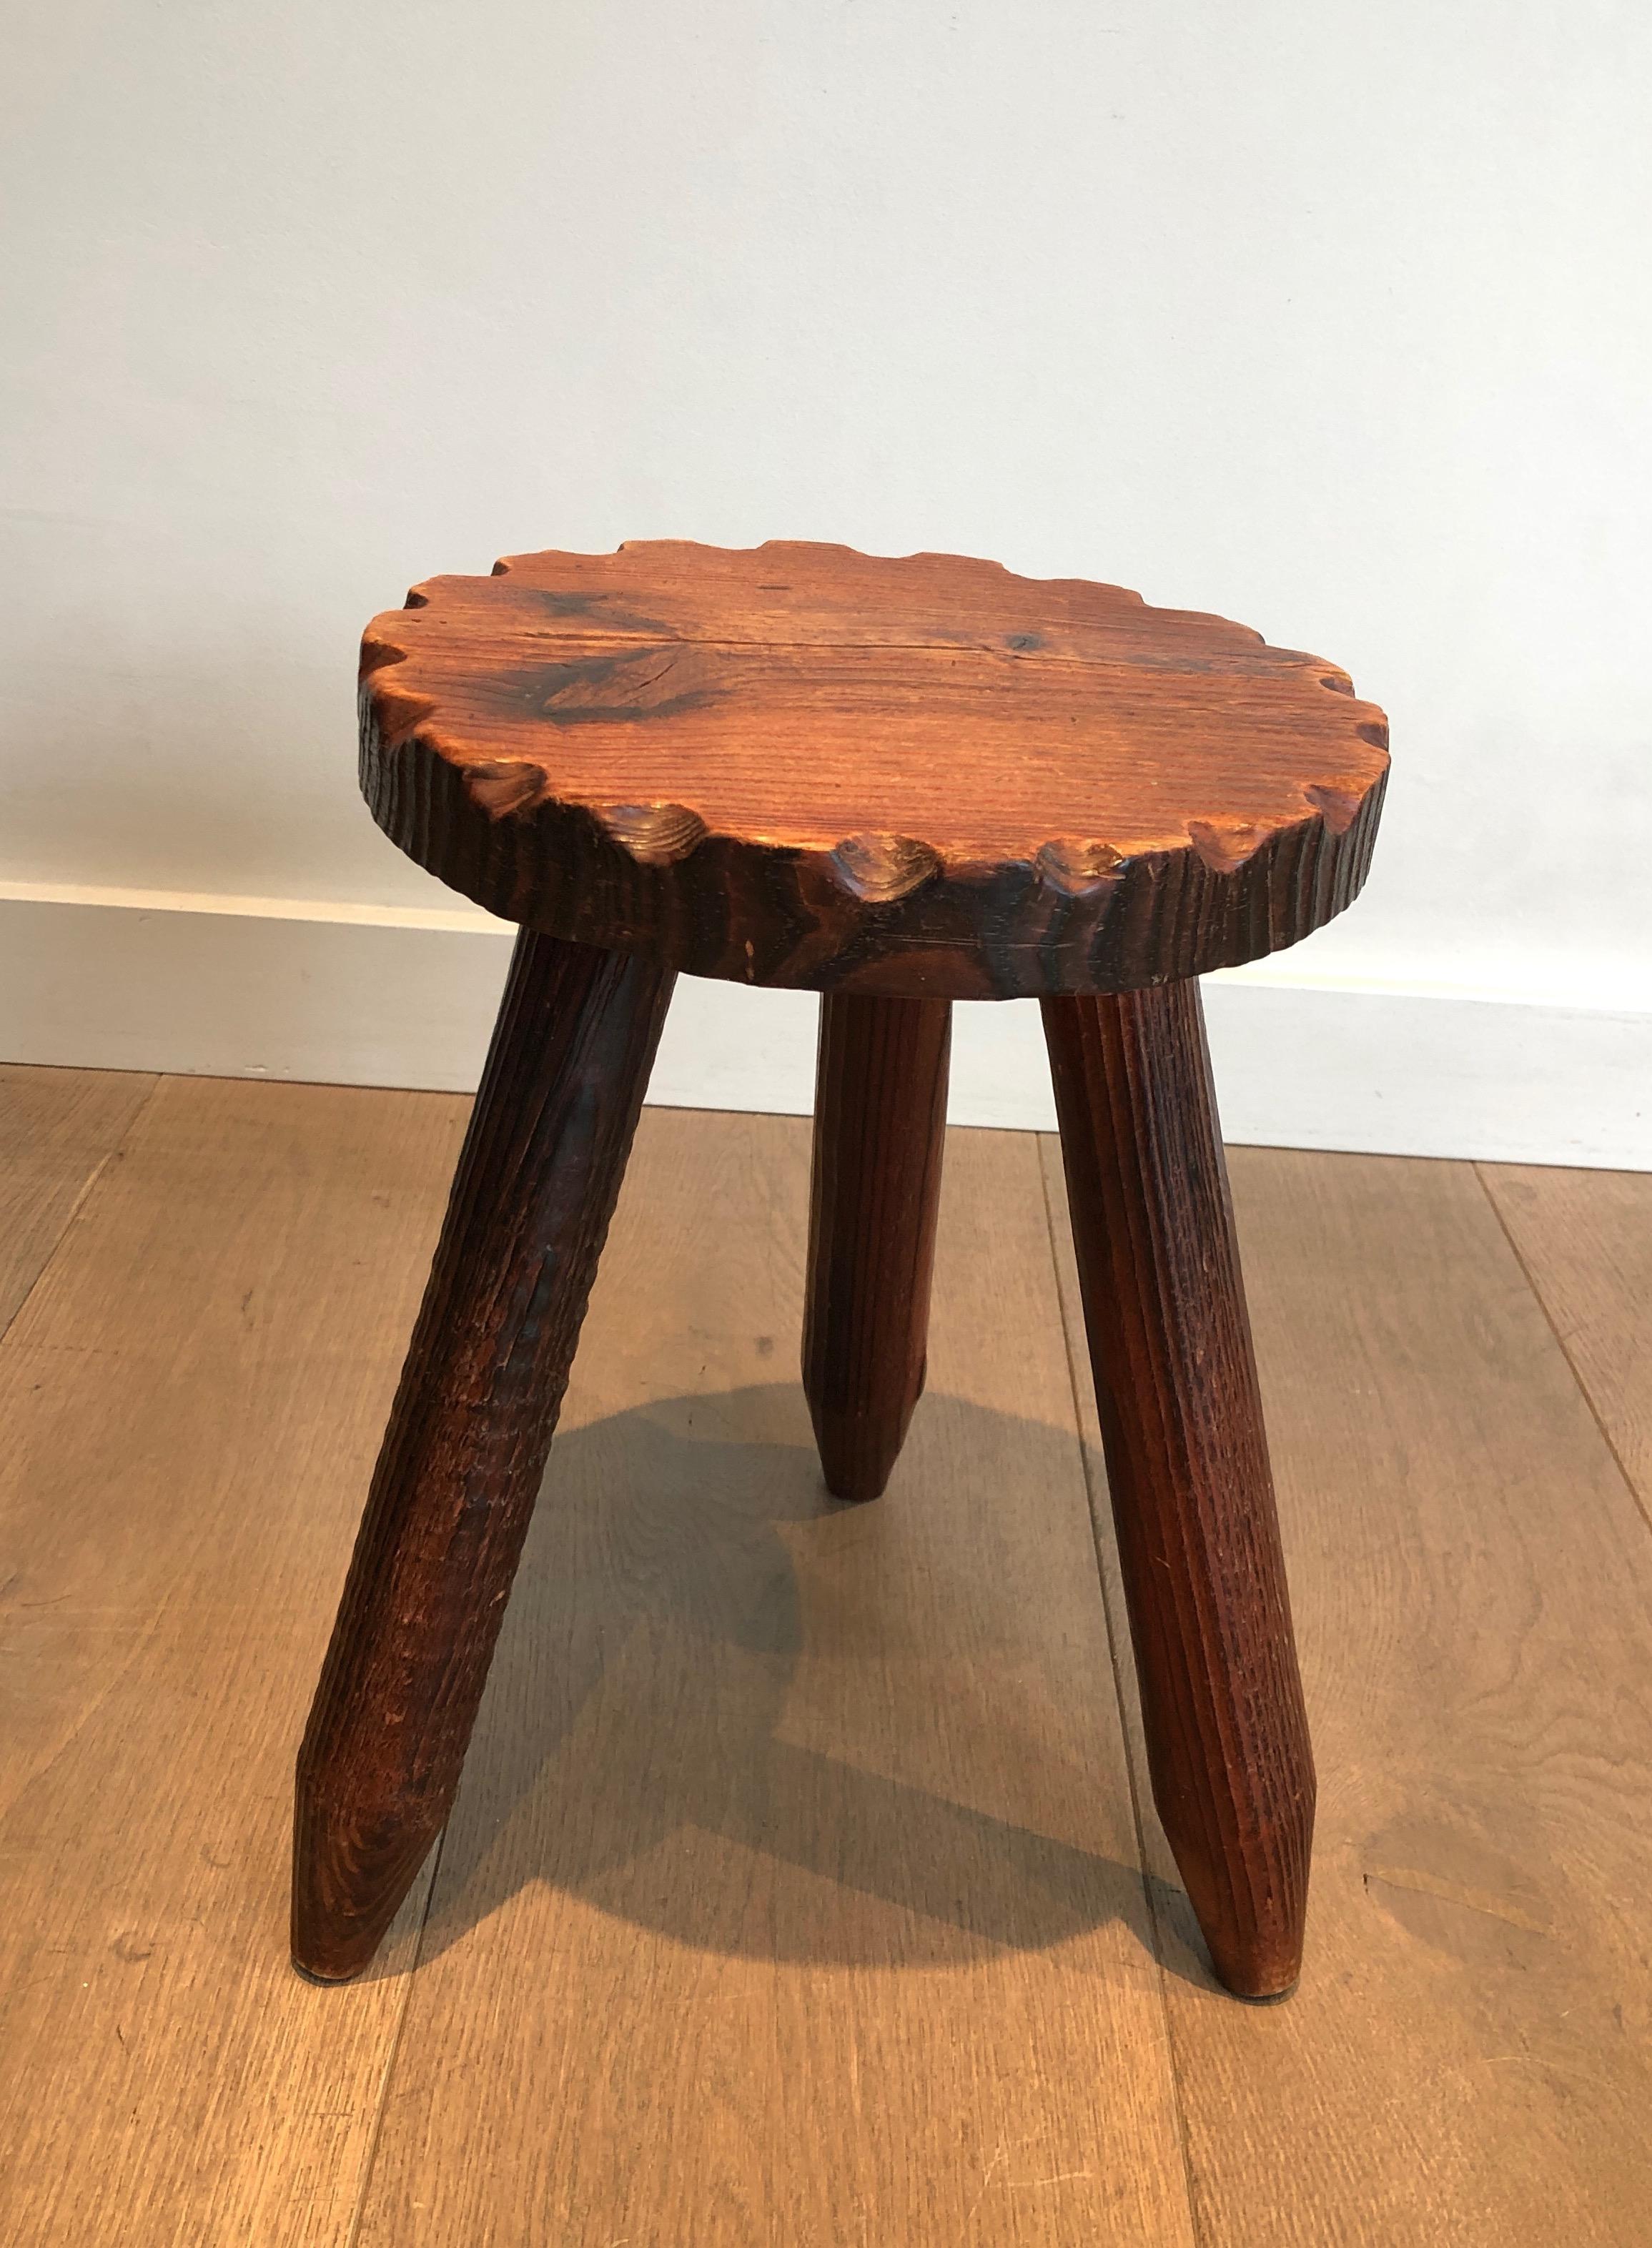 Pair of Pine Brutalist Stools, French Work, circa 1950 For Sale 8